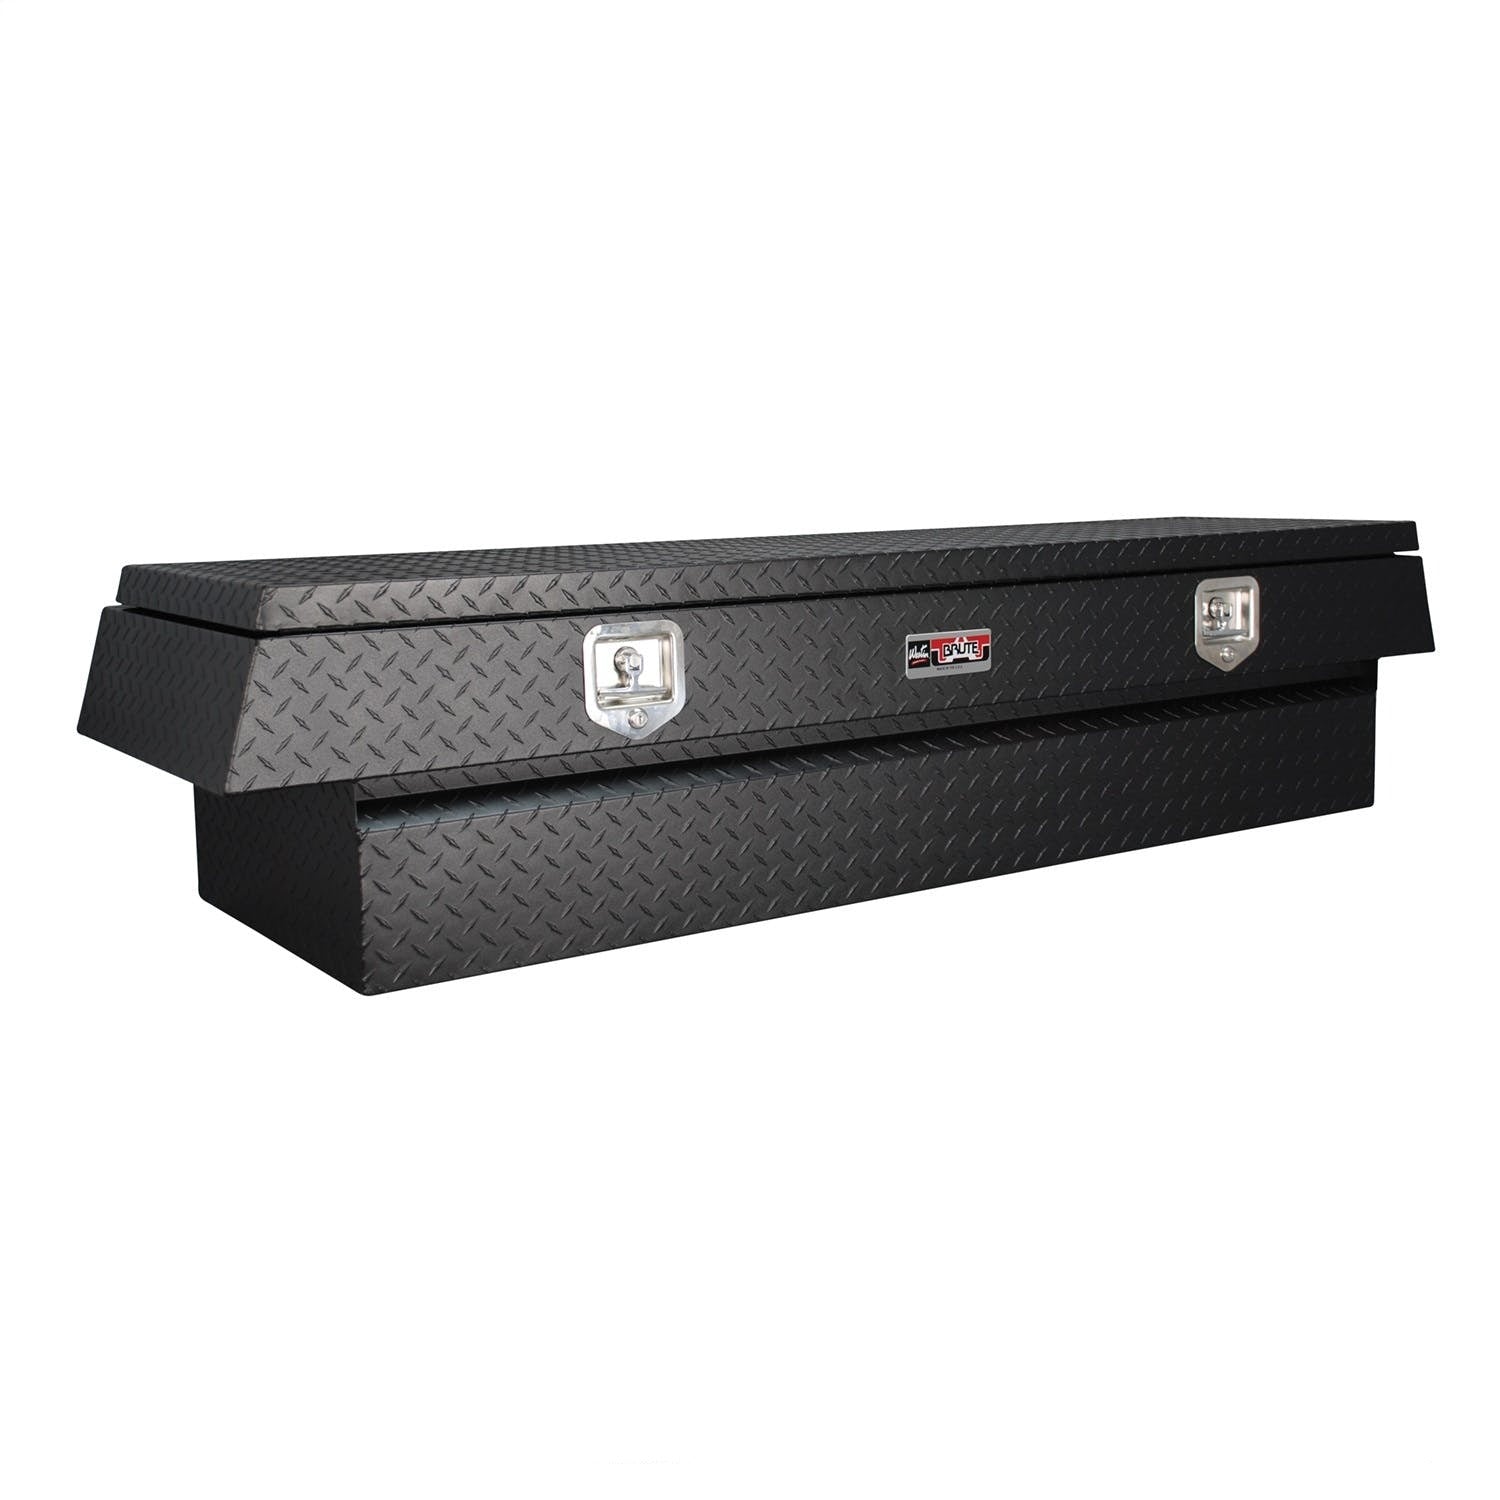 Westin Automotive 80-RB157GW-BT Gull Wing Lid Full Size Xtra Deep Overall Dims: 71x20x23 In.; Base Dims 60x20x16